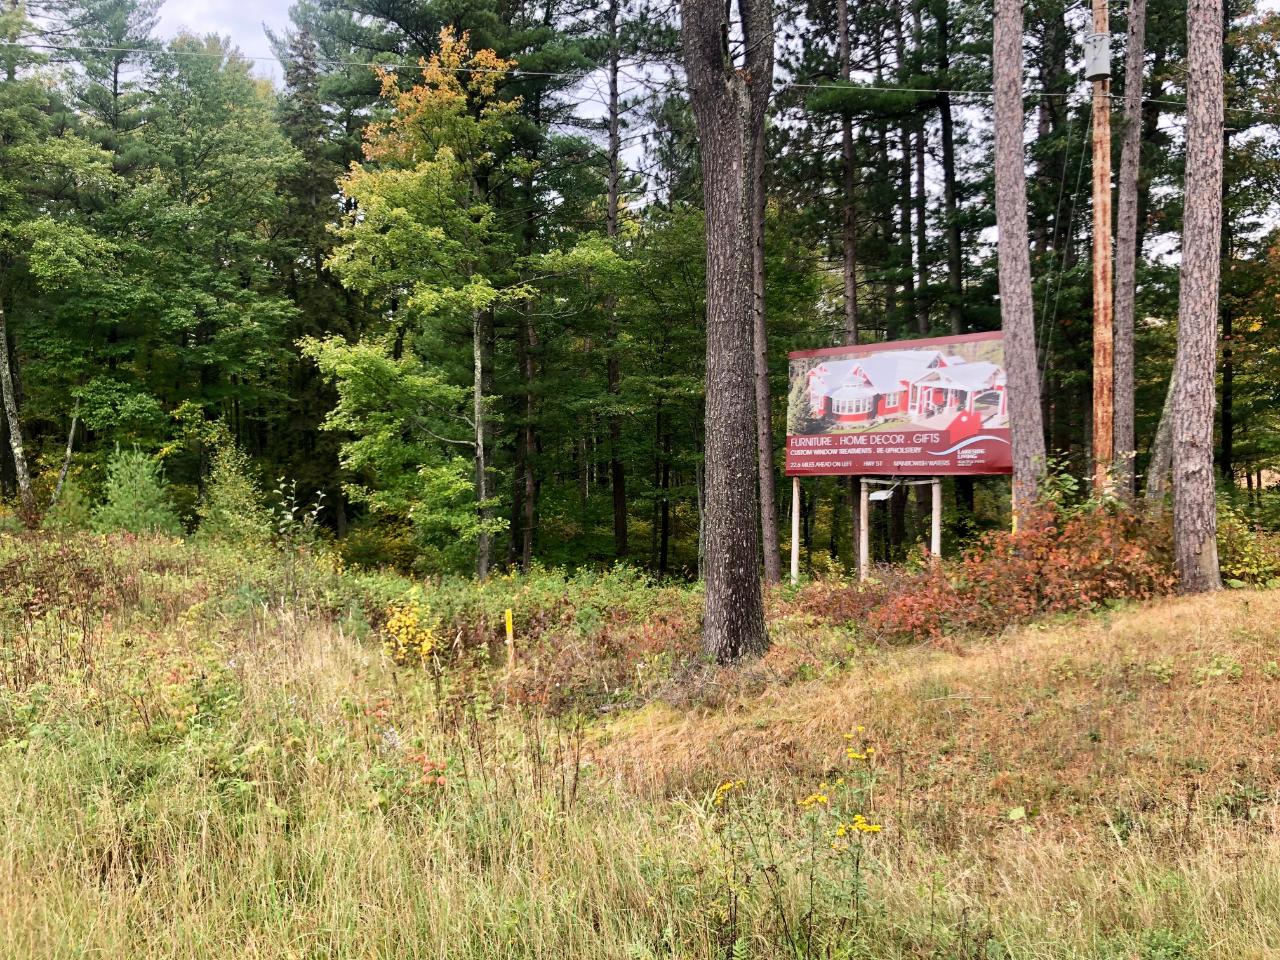 Almost 5 acres on Highway 51 with a billboard! Only 5 minutes from downtown Minocqua, you can access this great land from the highway or from the bearskin. If you need a commercial location, with advertising available, and great road traffic, this would be the most ideal and visible spot! 450' of Hwy 51 frontage!